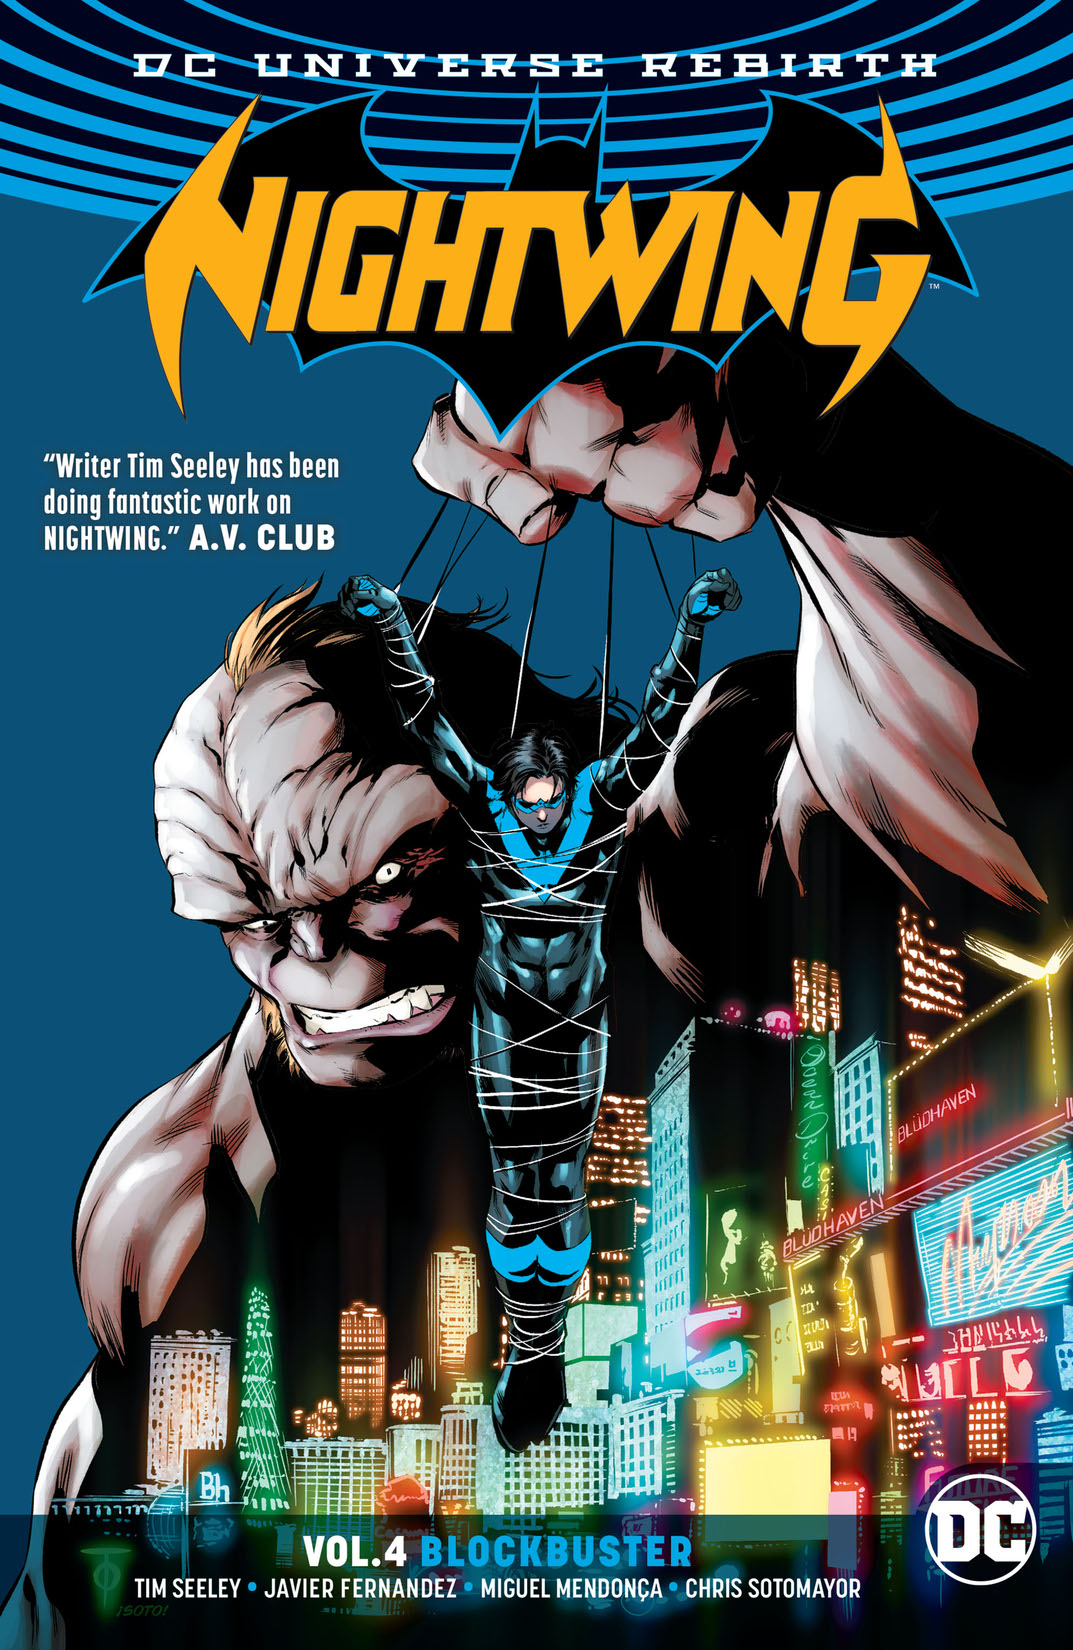 Nightwing Vol. 4: Blockbuster preview images